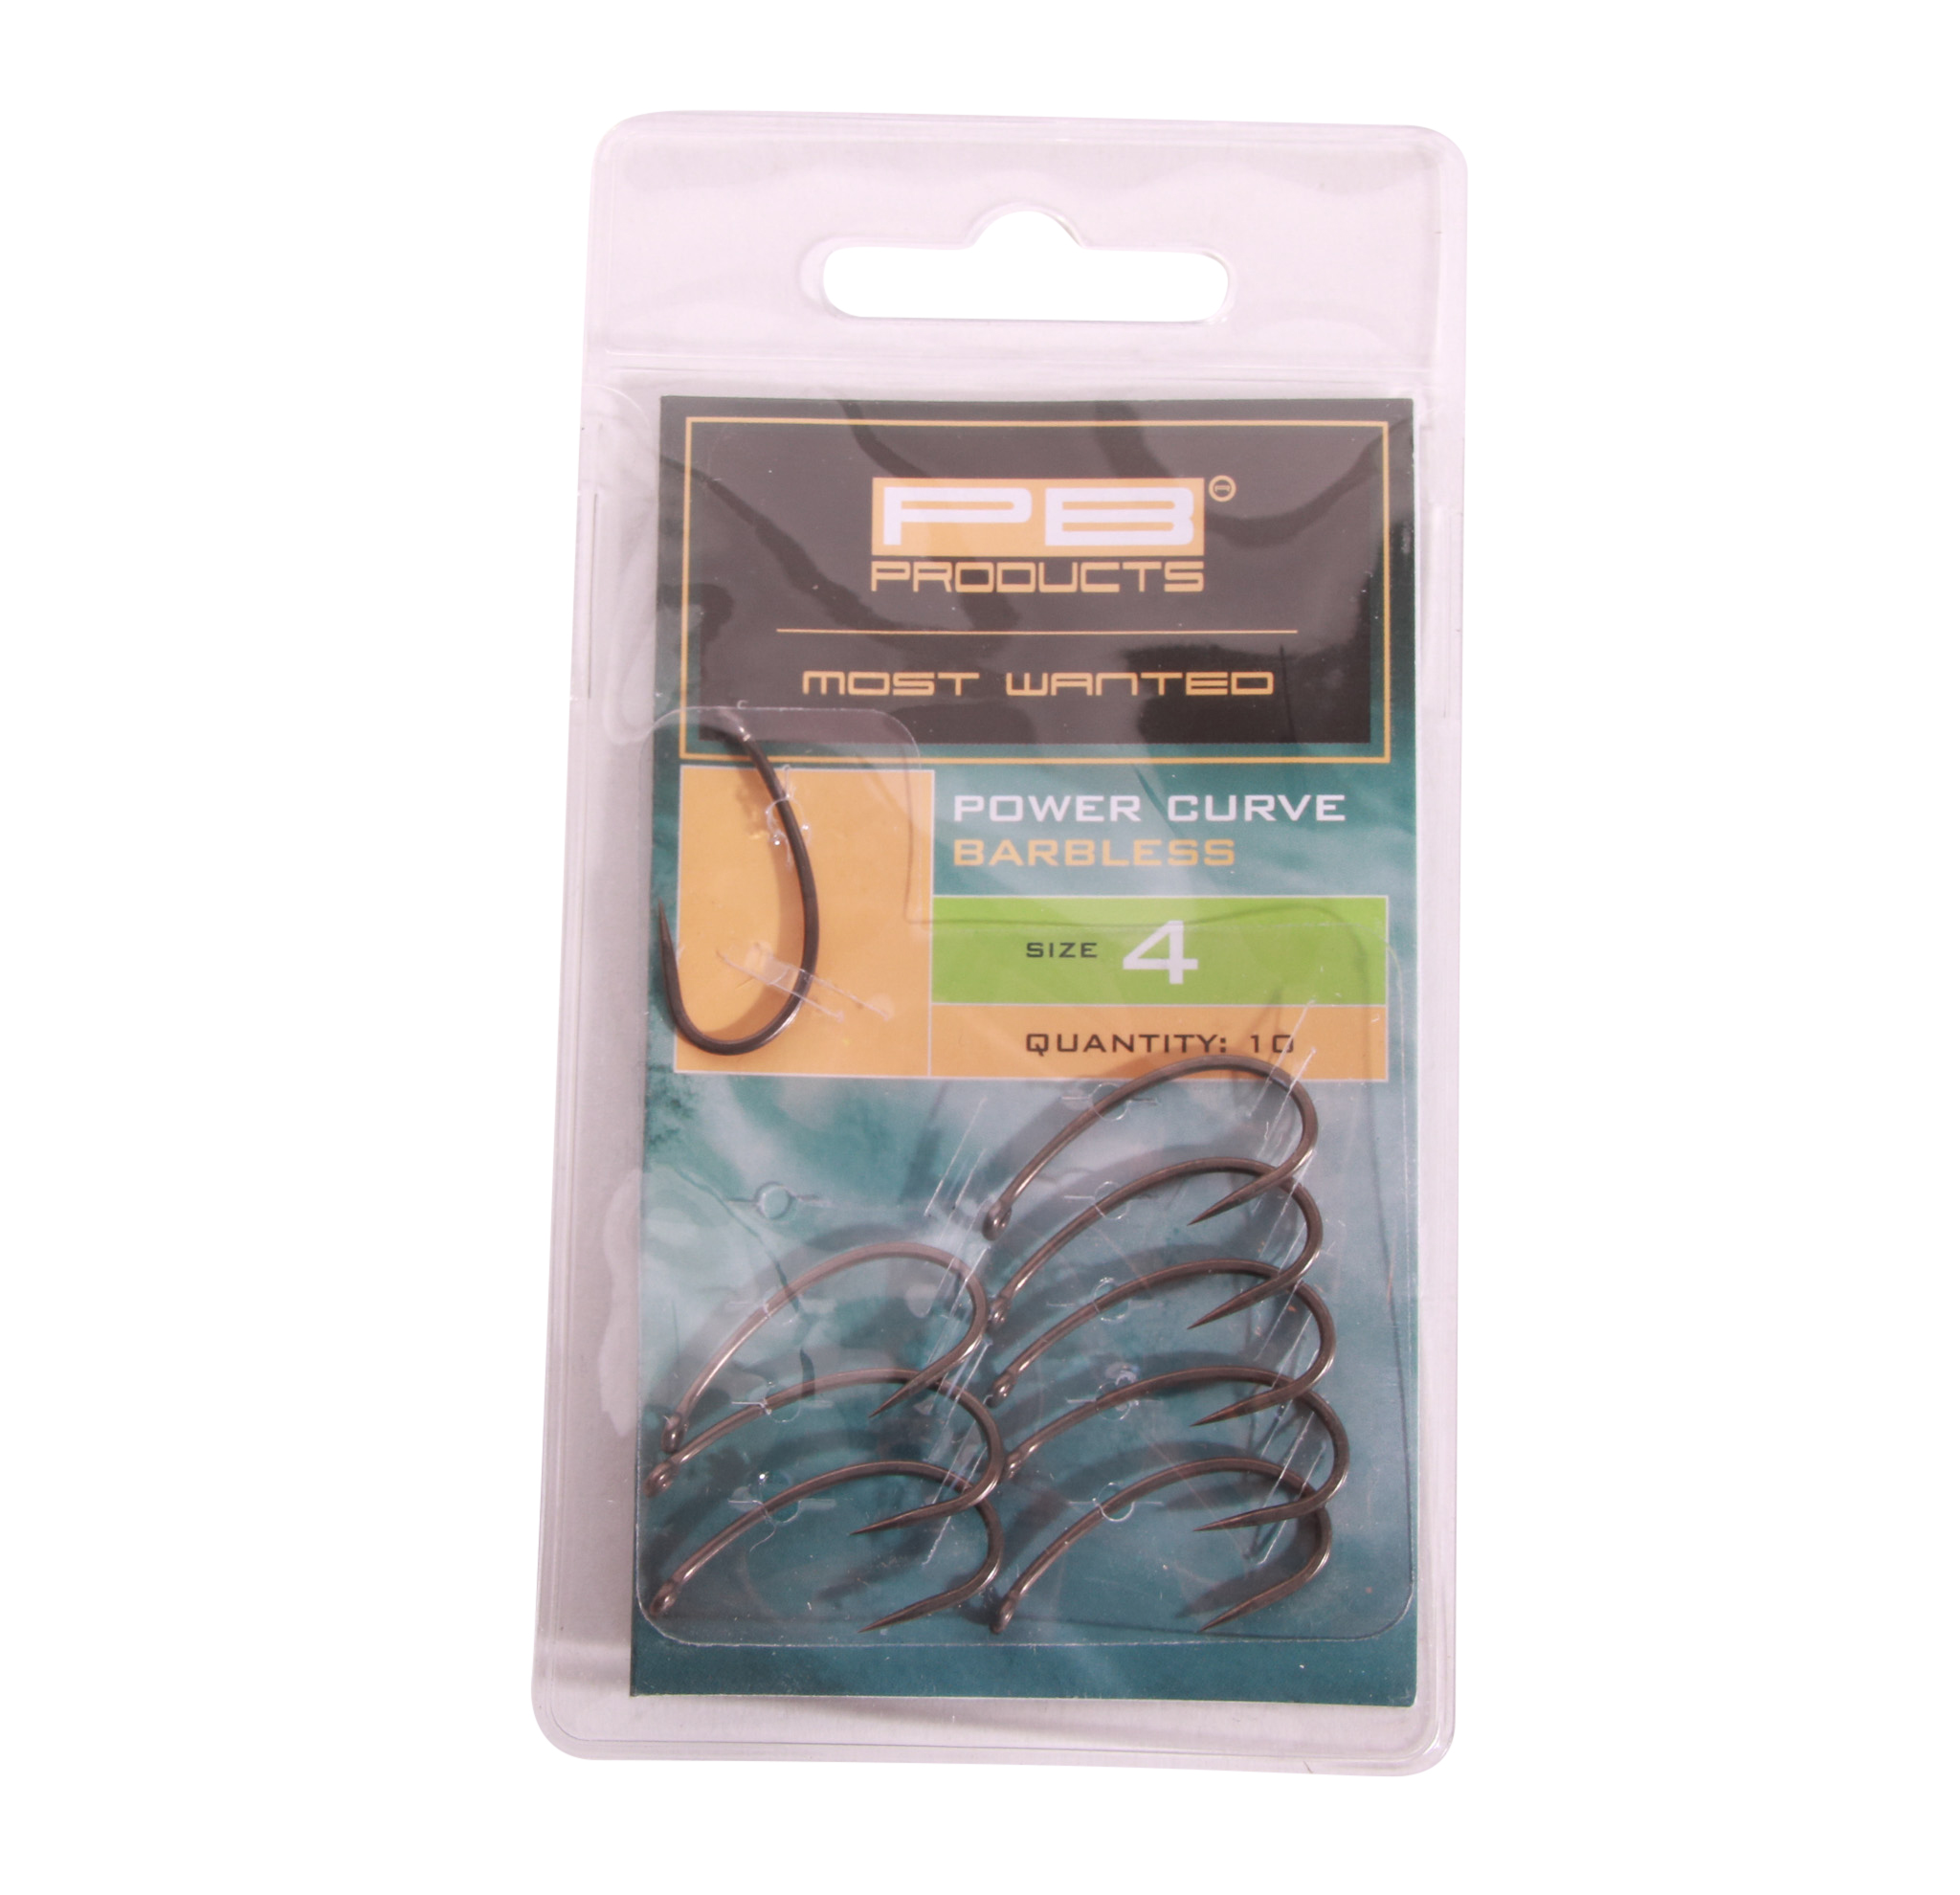 PB Products Power Curve Hook PTFE Barbless (10 pieces)